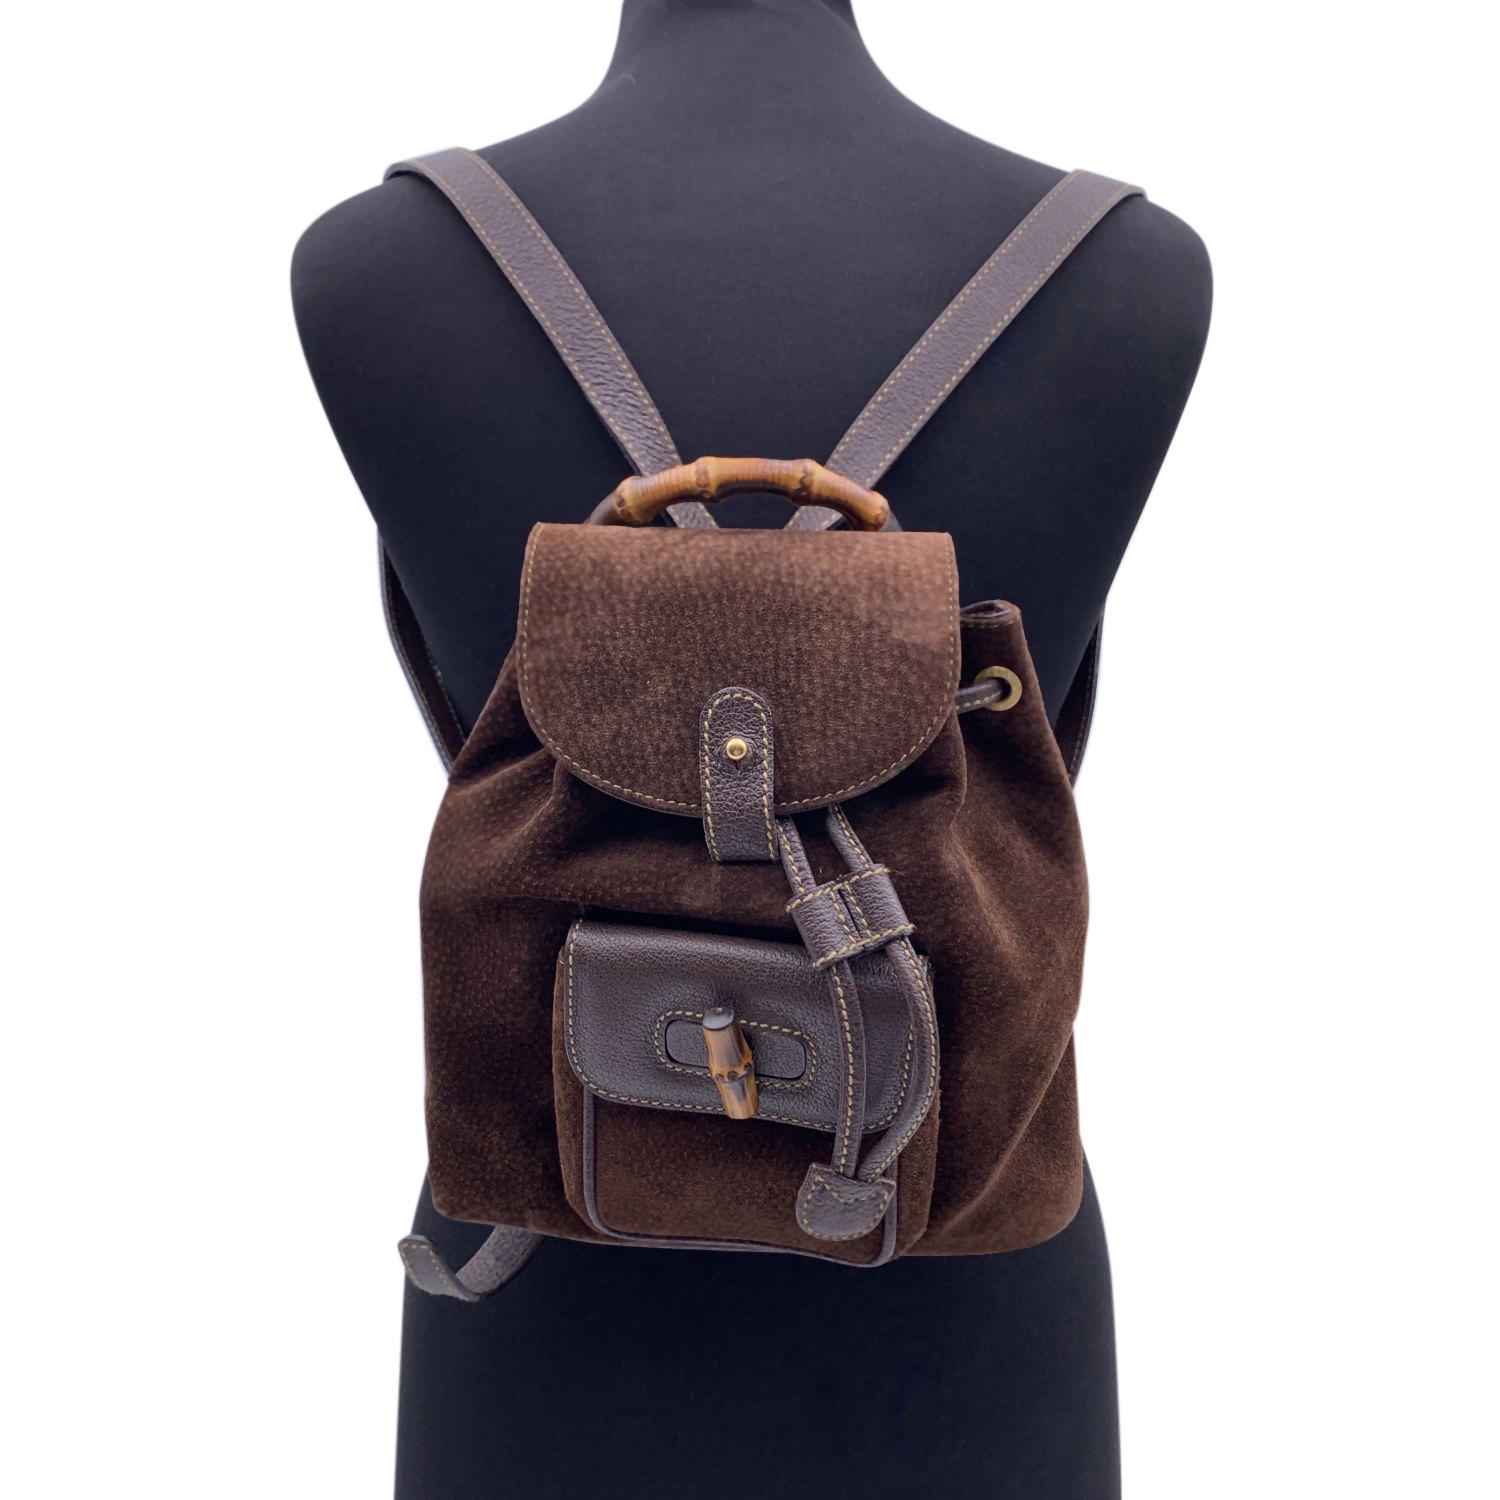 Vintage small backpack by Gucci, crafted in brown suede and leather. It features Bamboo handle and and knob. 1 front pocket with twist lock closure. Flap closure and drawstring top opening. gold metal hardware. Internal diamond lining. 1 side zip